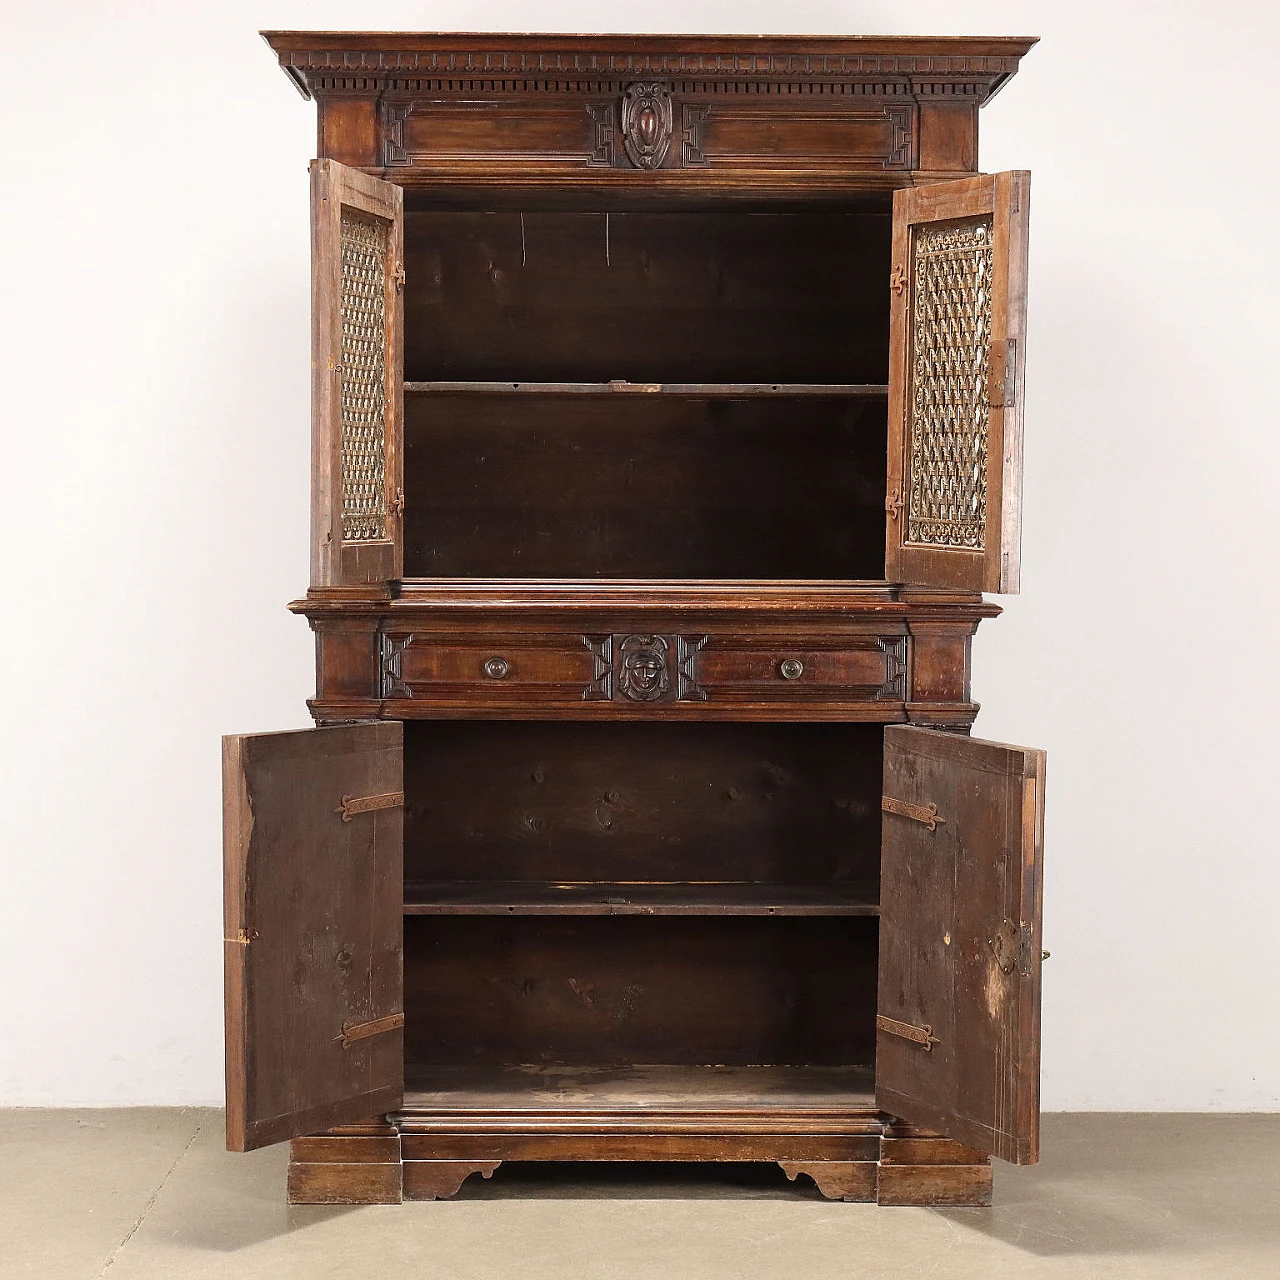 Double-body sideboard made of carved spruce and iron grating 3